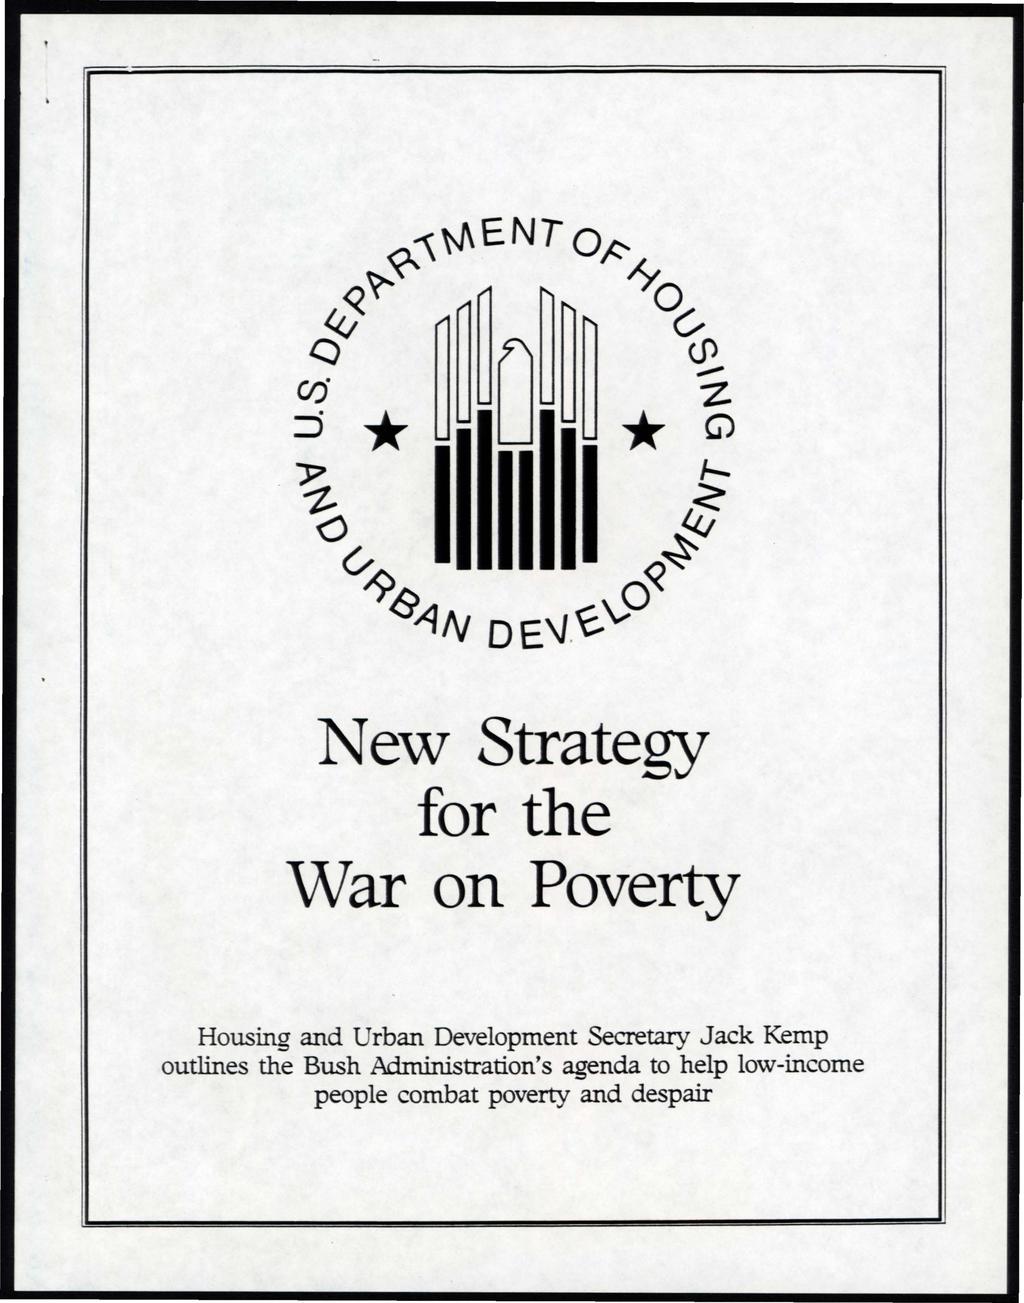 New Strategy for the War on Poverty Housing and Urban Development Secretary Jack Kemp outlines